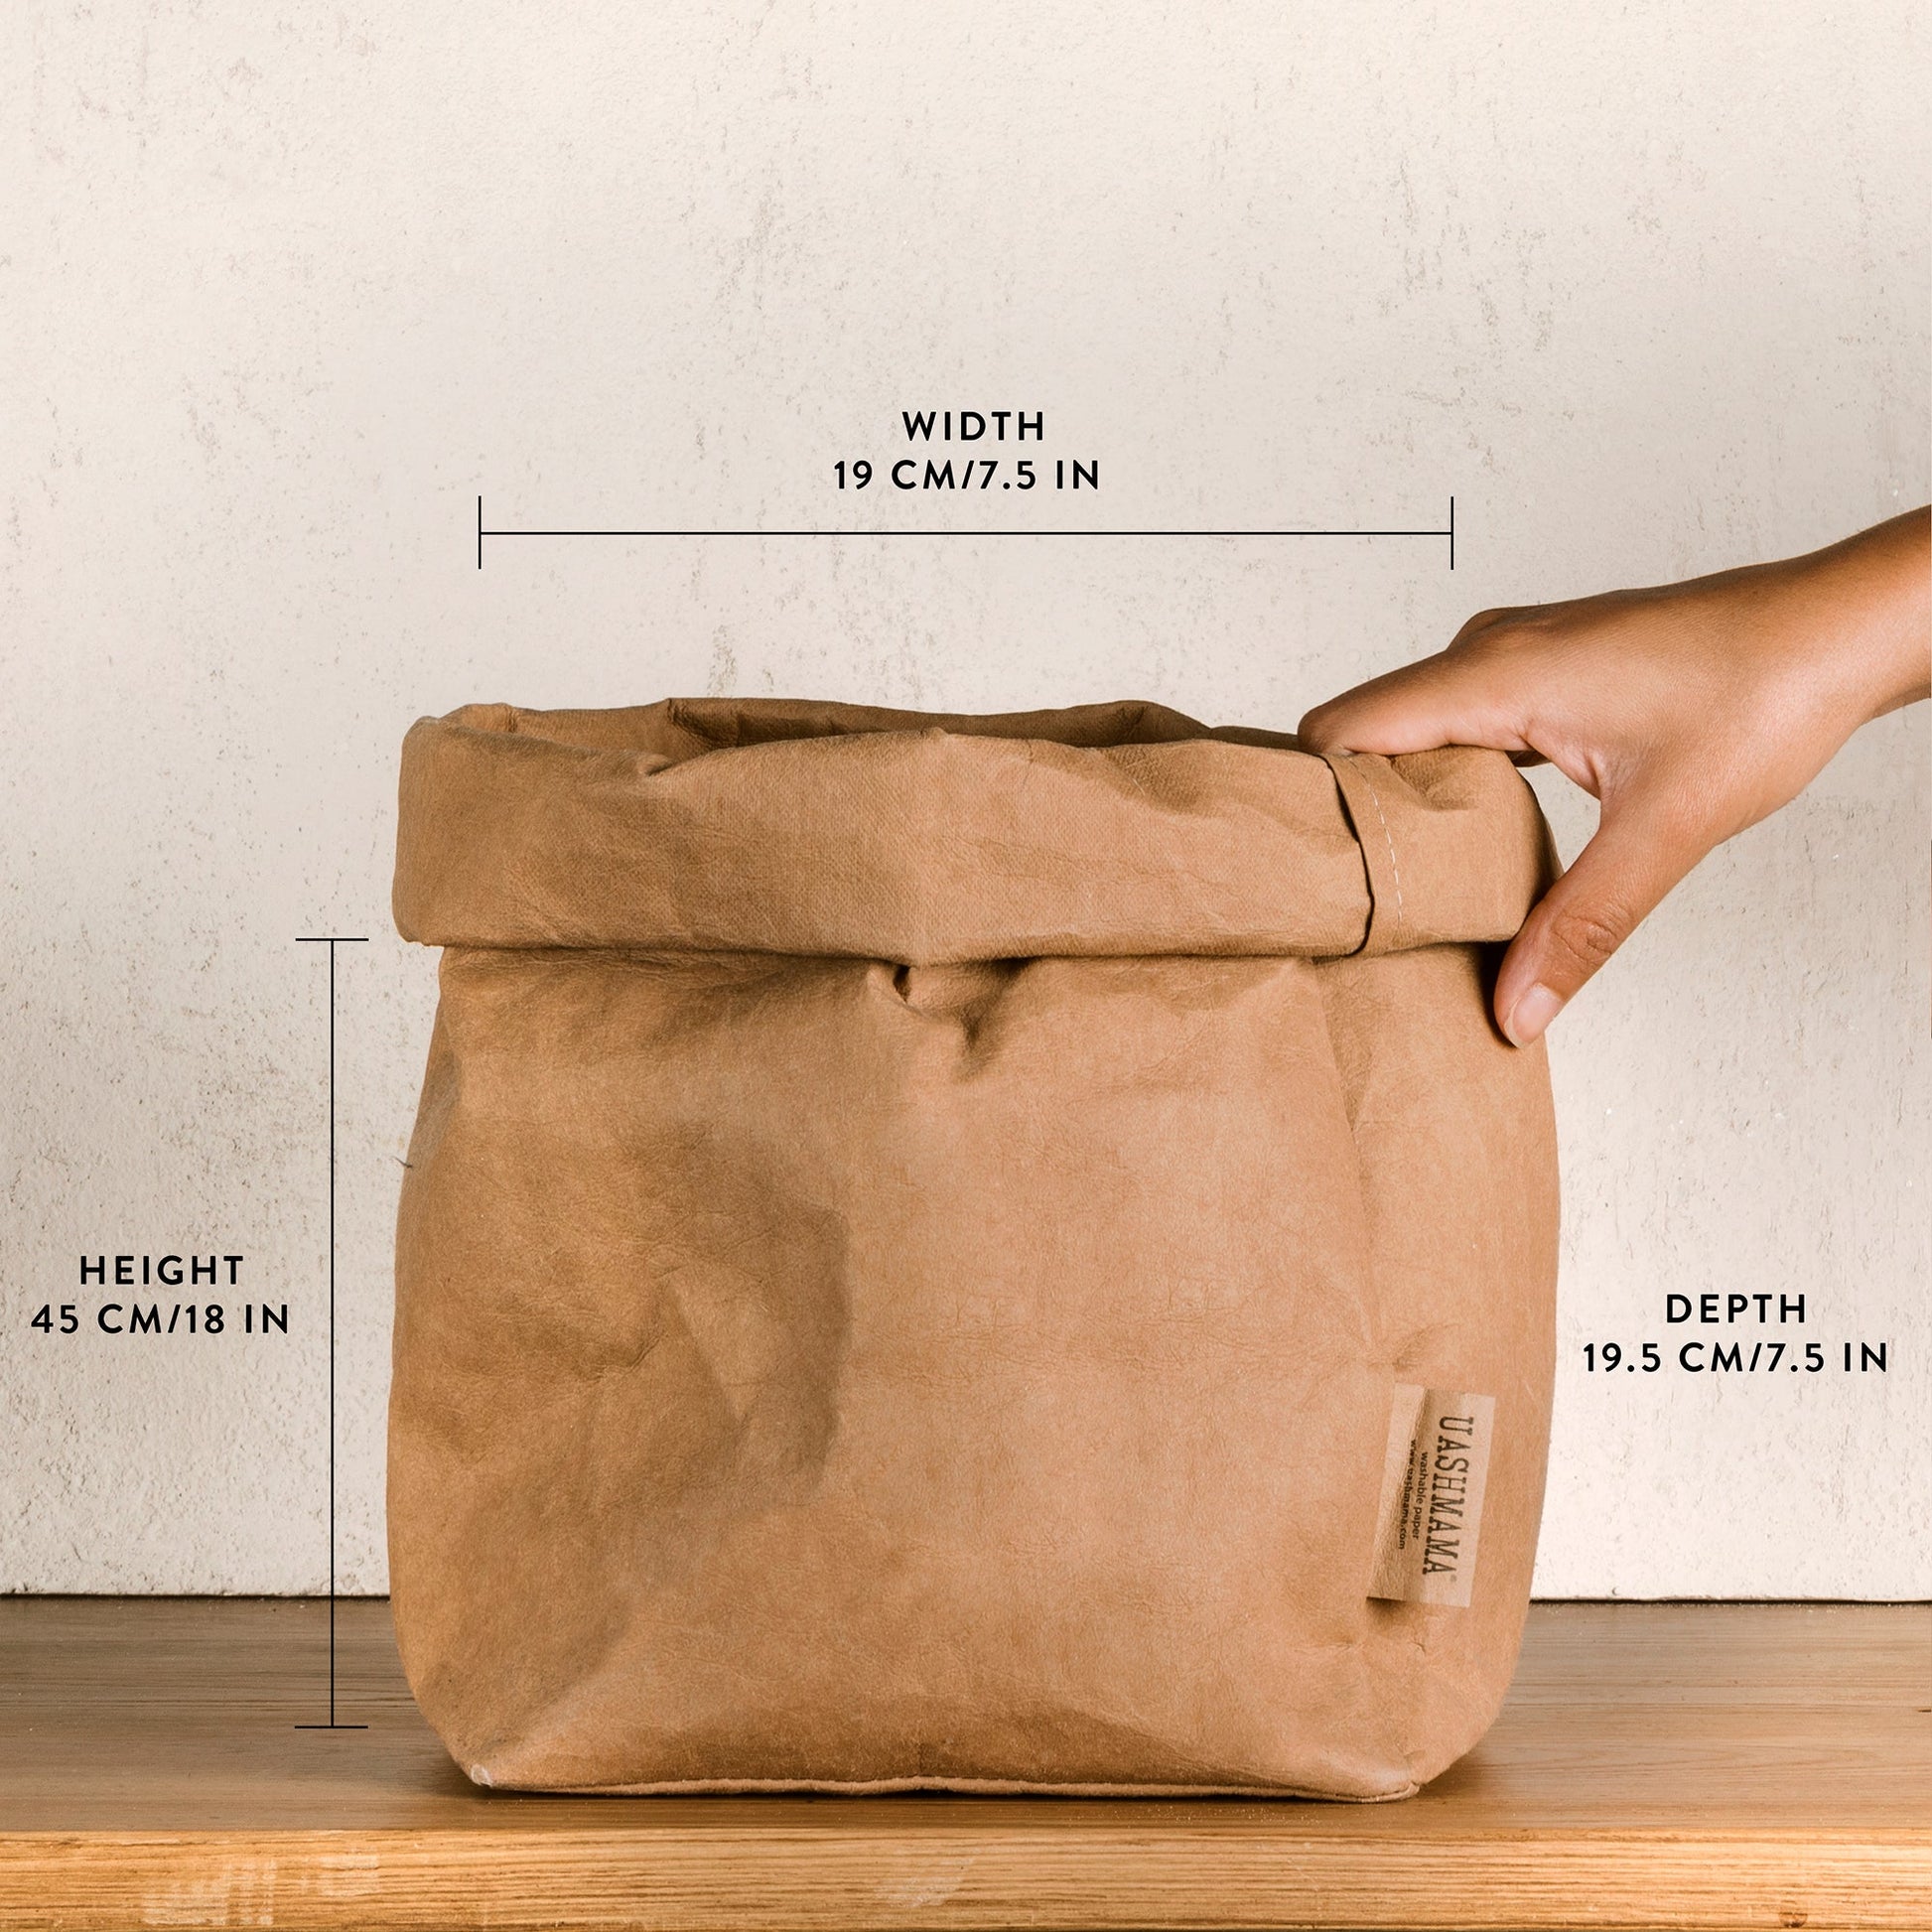 A washable paper bag is shown. The bag is rolled down at the top and features a UASHMAMA logo label on the bottom left corner. The bag pictured is the large plus size in tan. The dimensions are shown on the image and a hand is shown holding the top of the bag.